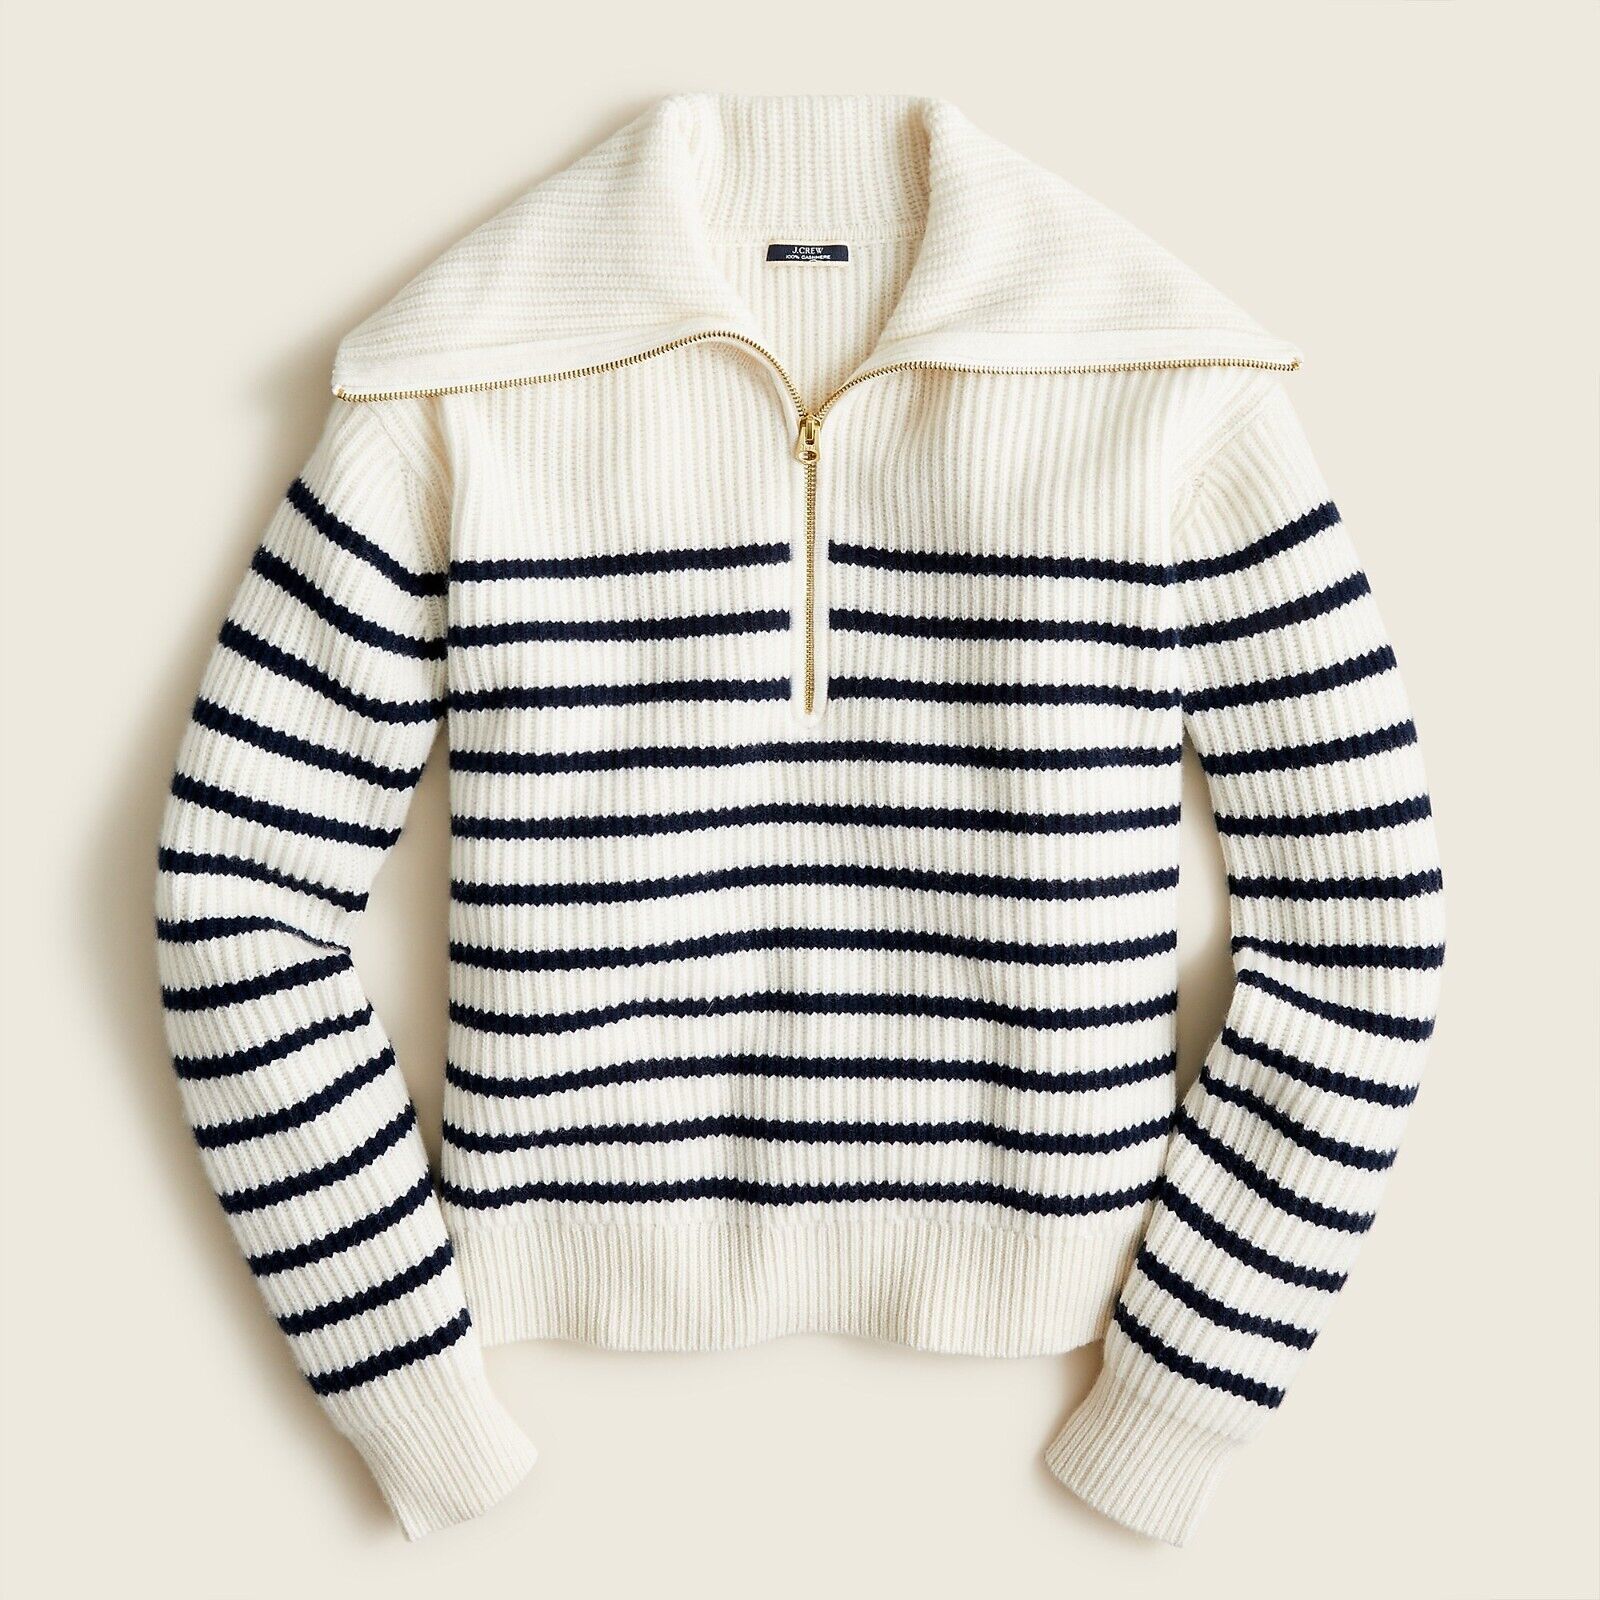 Primary image for NWT J.Crew Cashmere Half-Zip Pullover Sweater in Snow Navy Stripe M $298